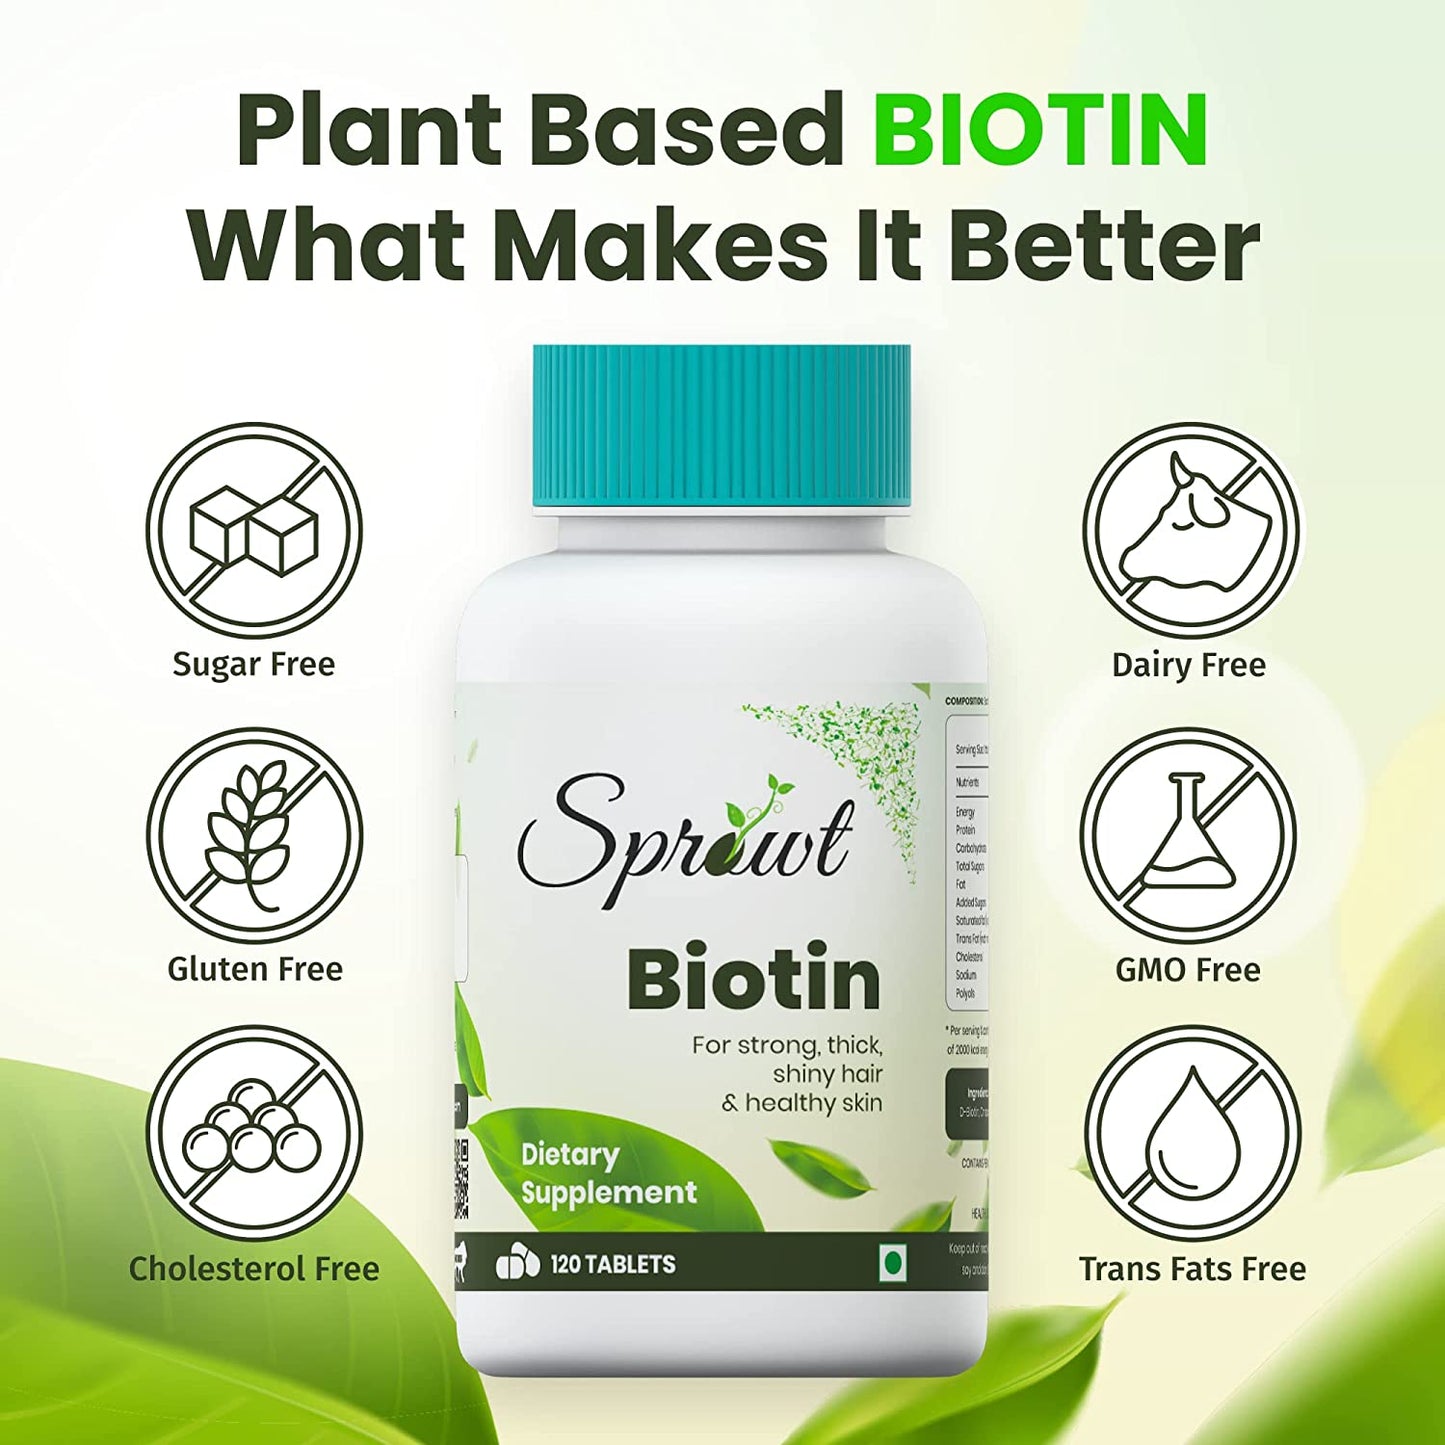 Sprowt Plant Based Biotin for Hair Growth, Skin & Nails - 10000 mcg